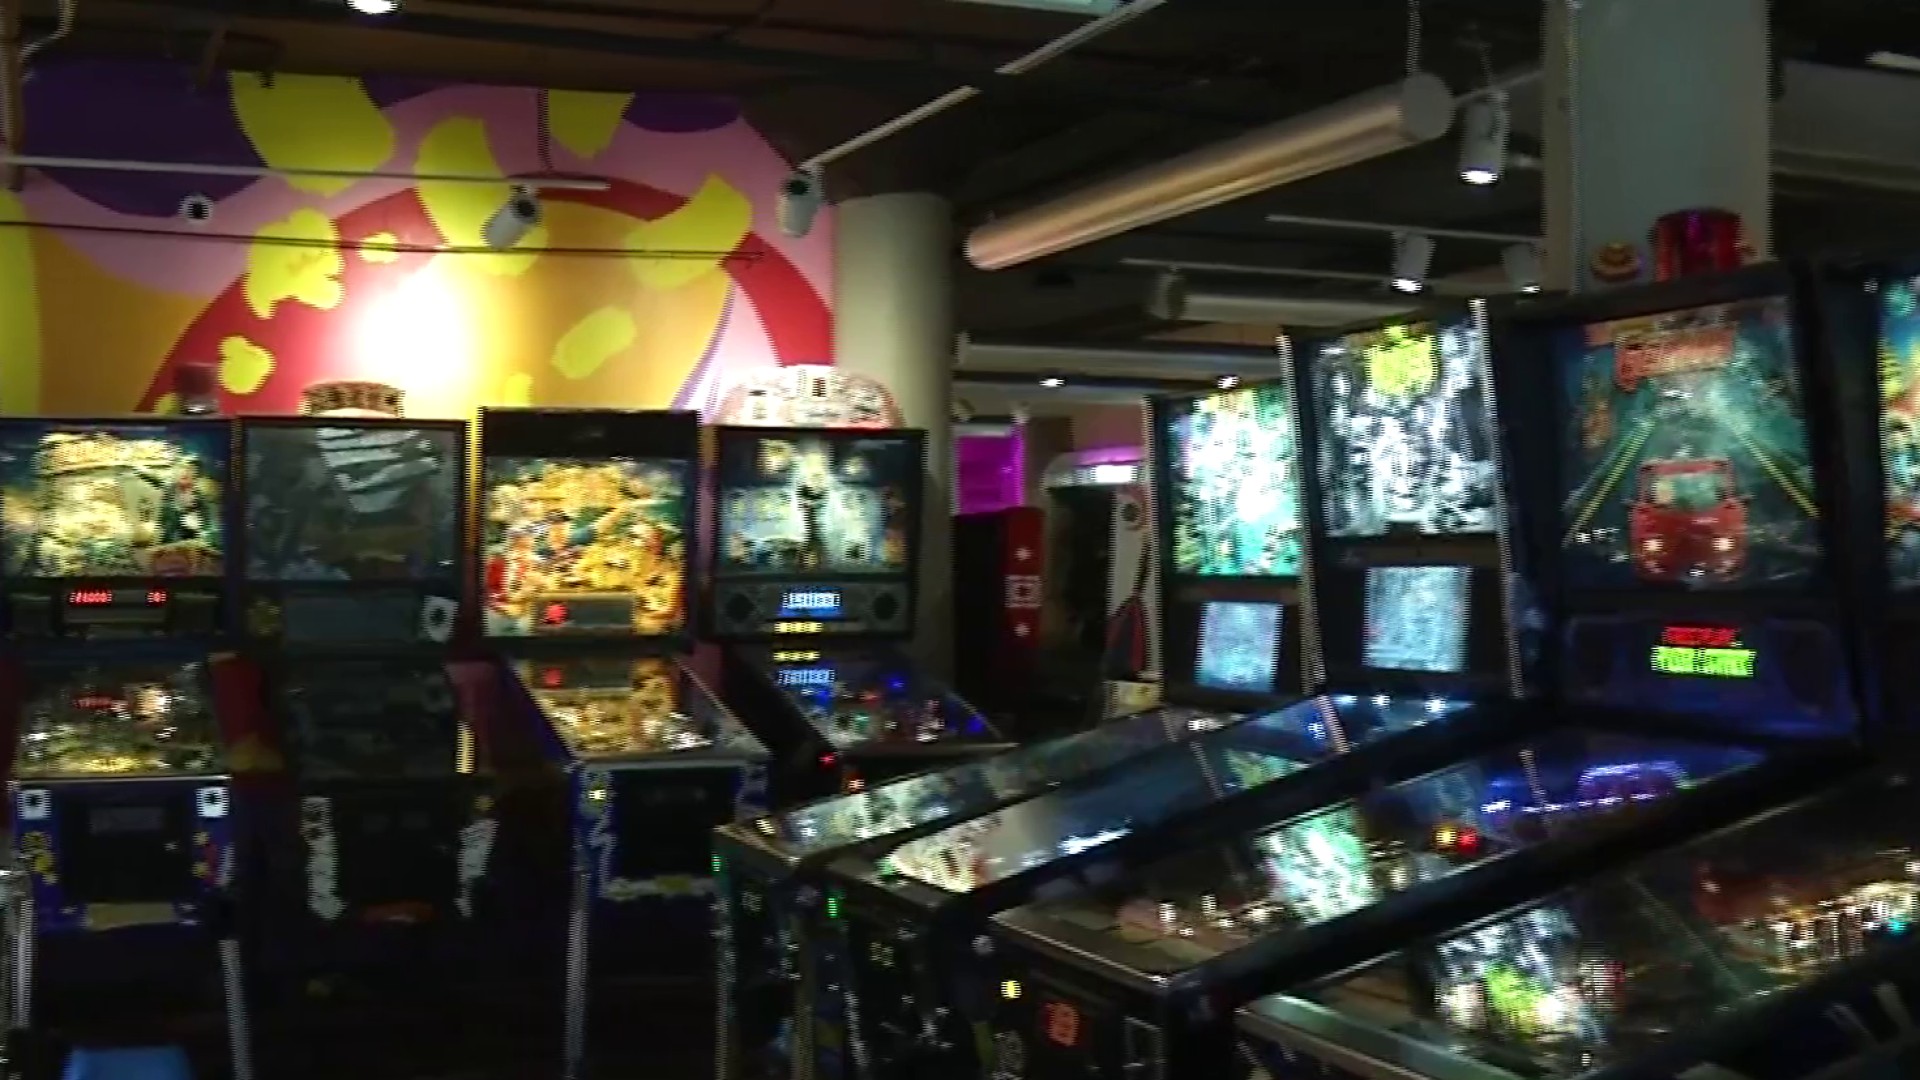 Pinball museum revives American arcades - The Columbian